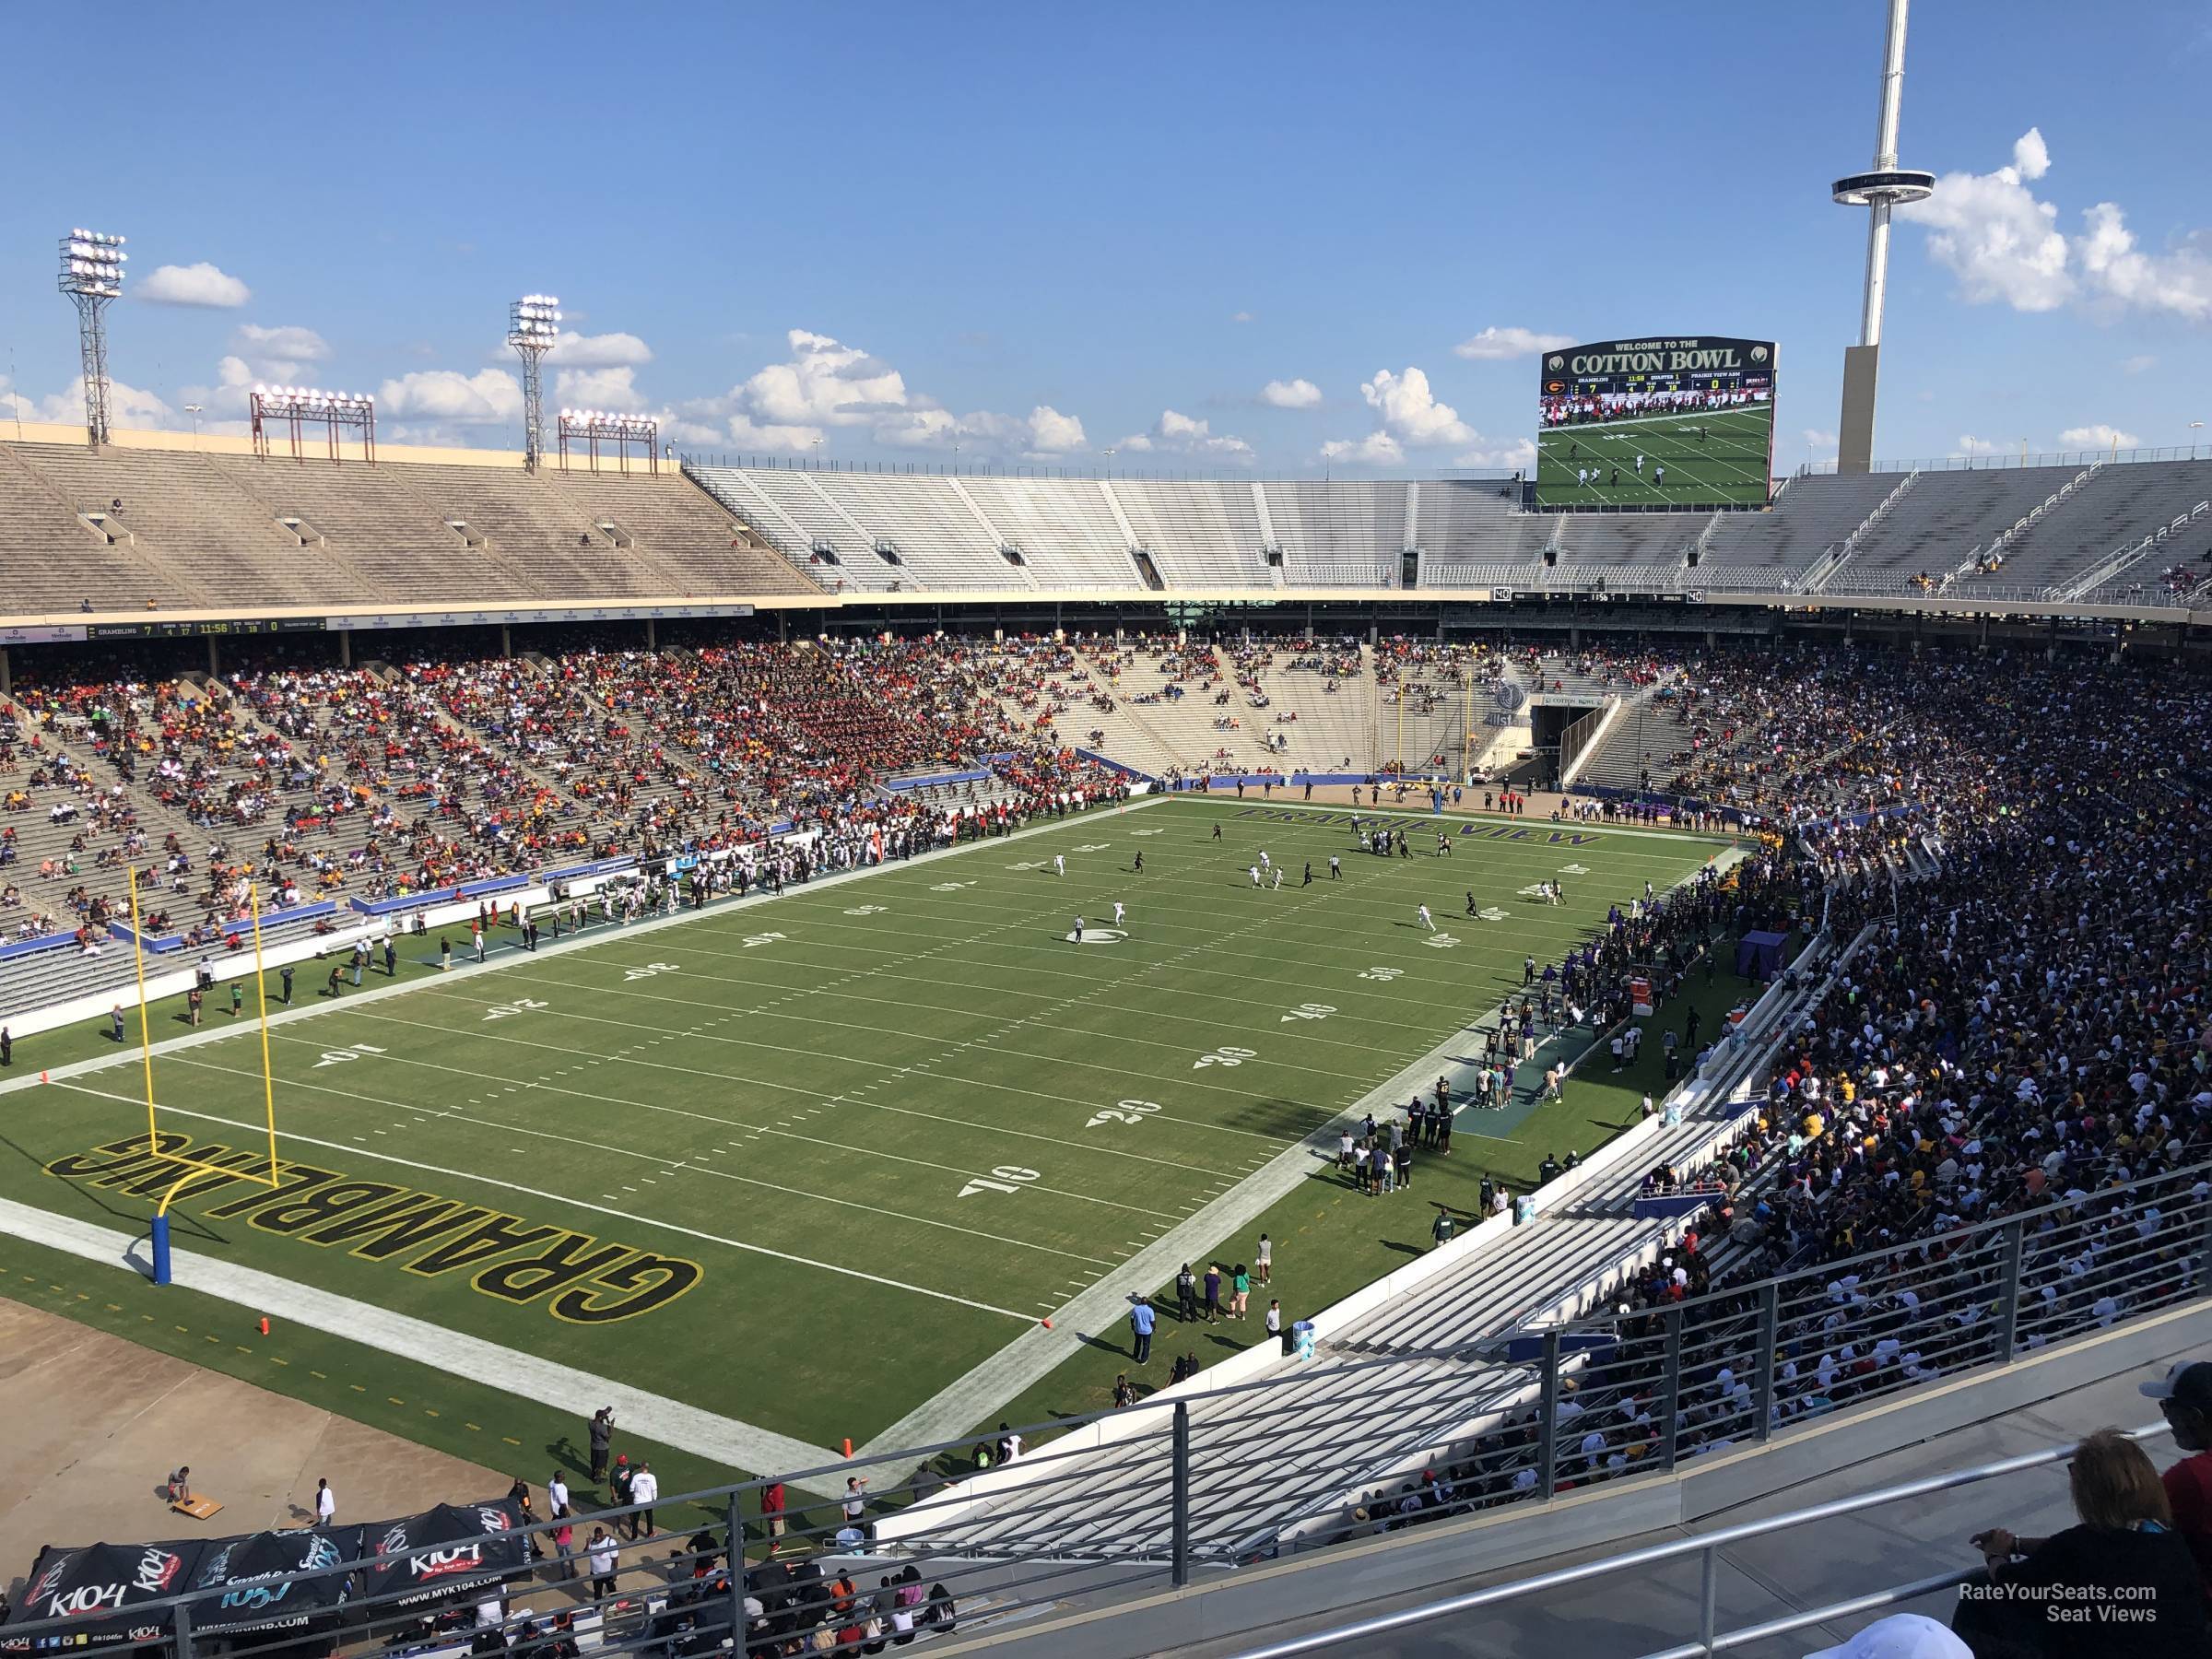 section 113, row 8 seat view  - cotton bowl